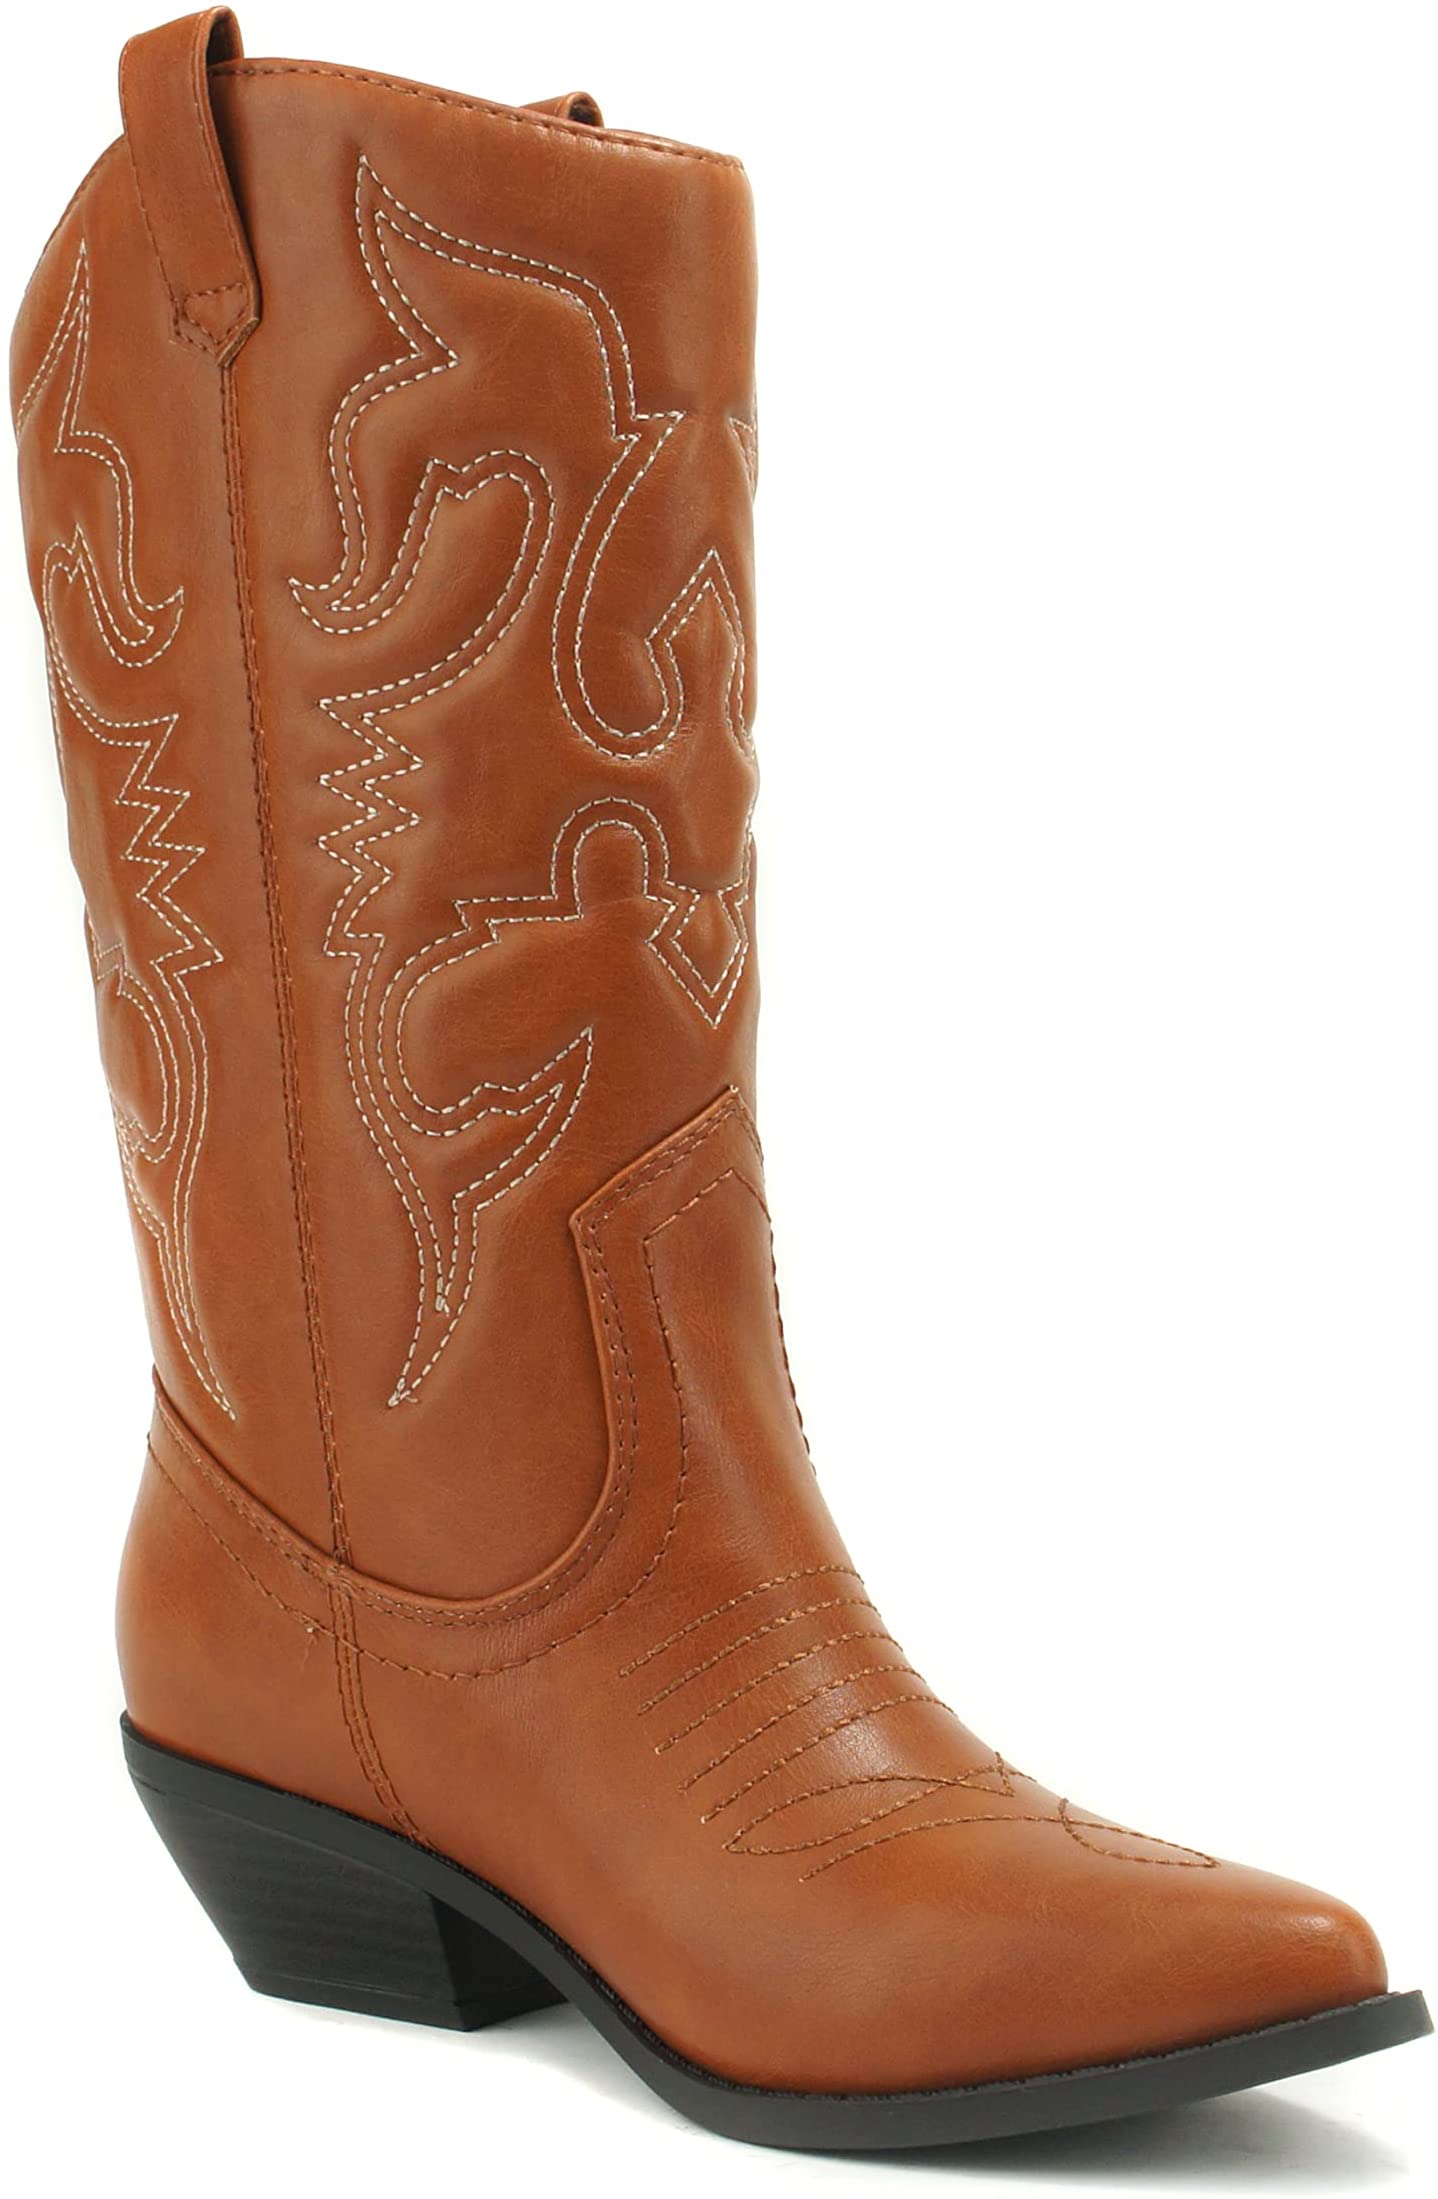 Soda Women Cowgirl Cowboy Western Stitched Boots Pointy Toe Knee High Reno-S Cognac Tan Light Brown 7.5 - image 1 of 4